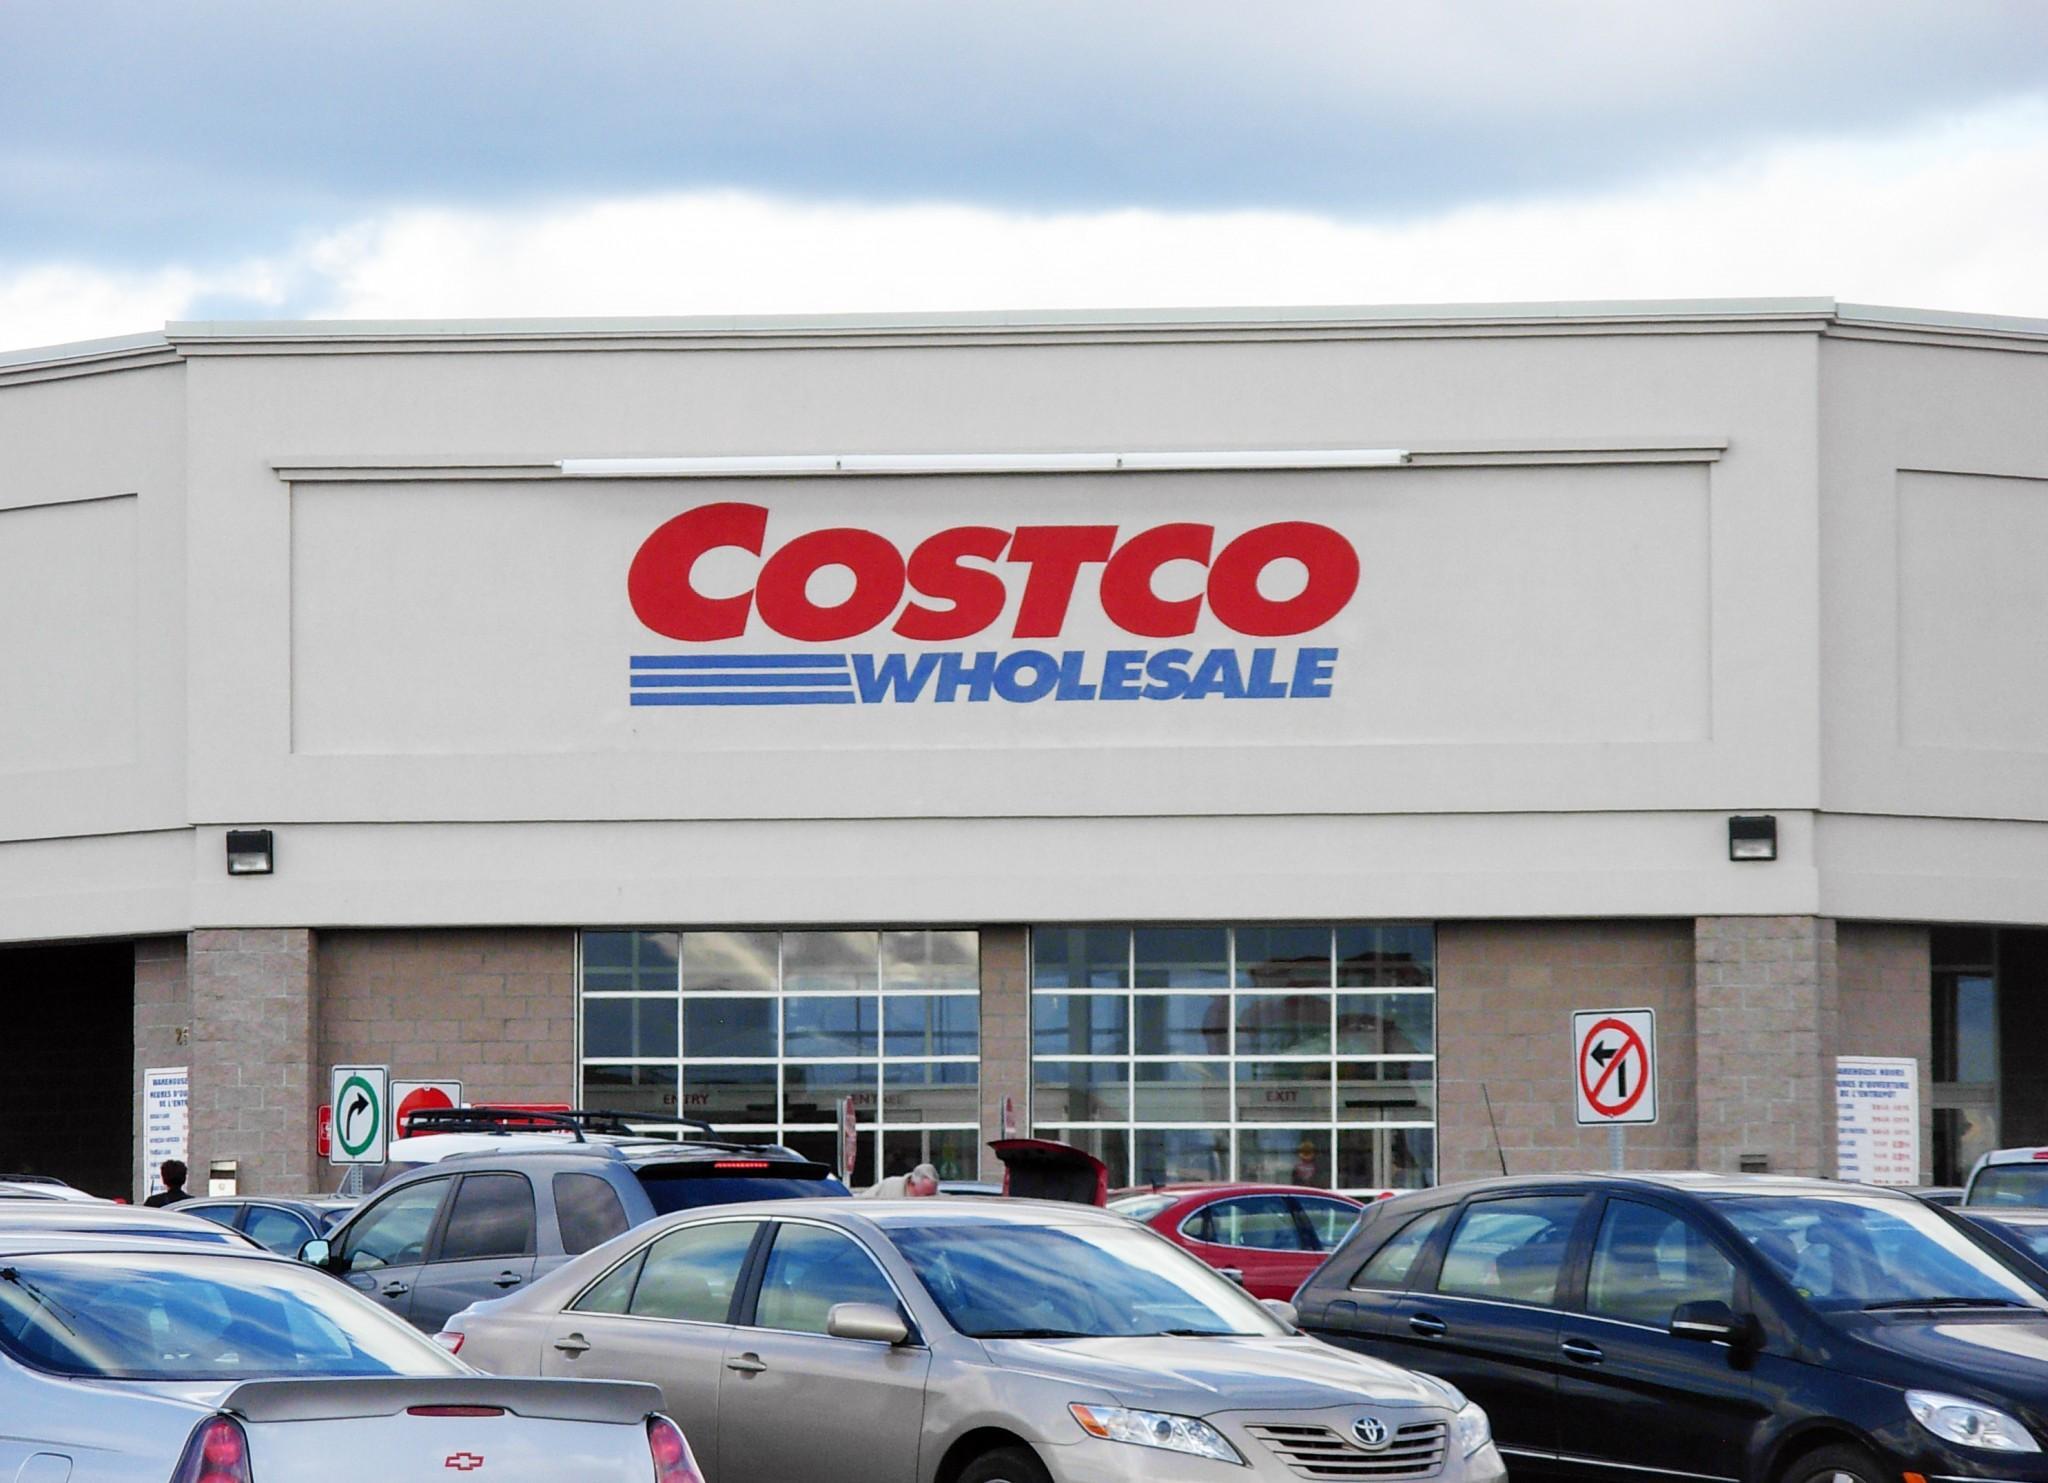 costco to be built near fort collins the rocky mountain collegian the rocky mountain collegian